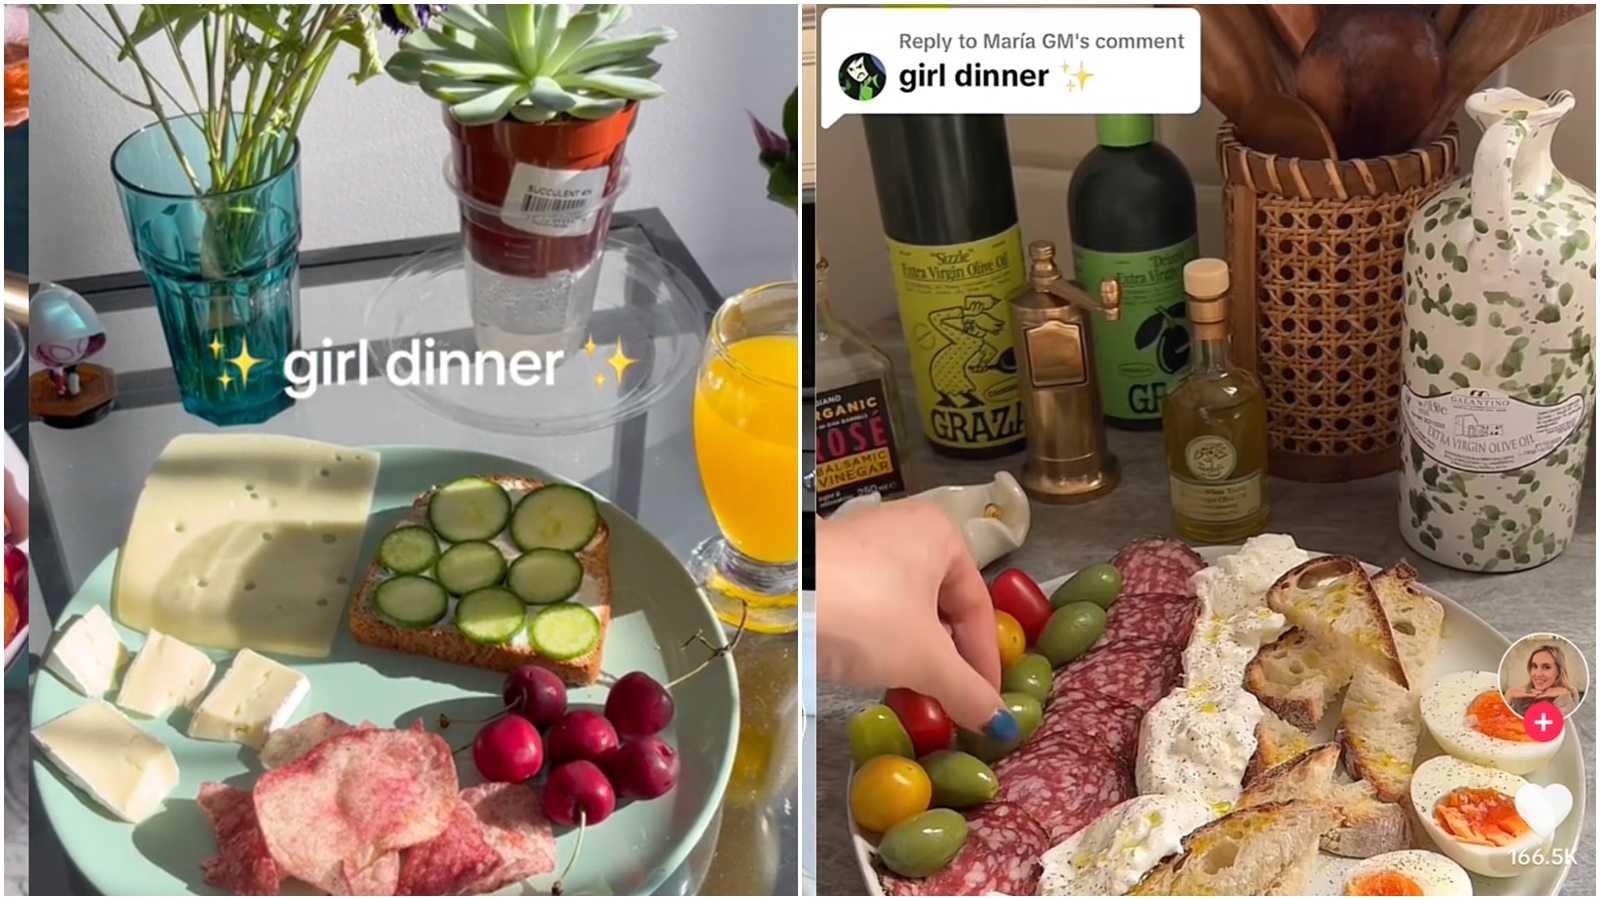 This is what your girl dinner should actually have. (Source: Instagram)